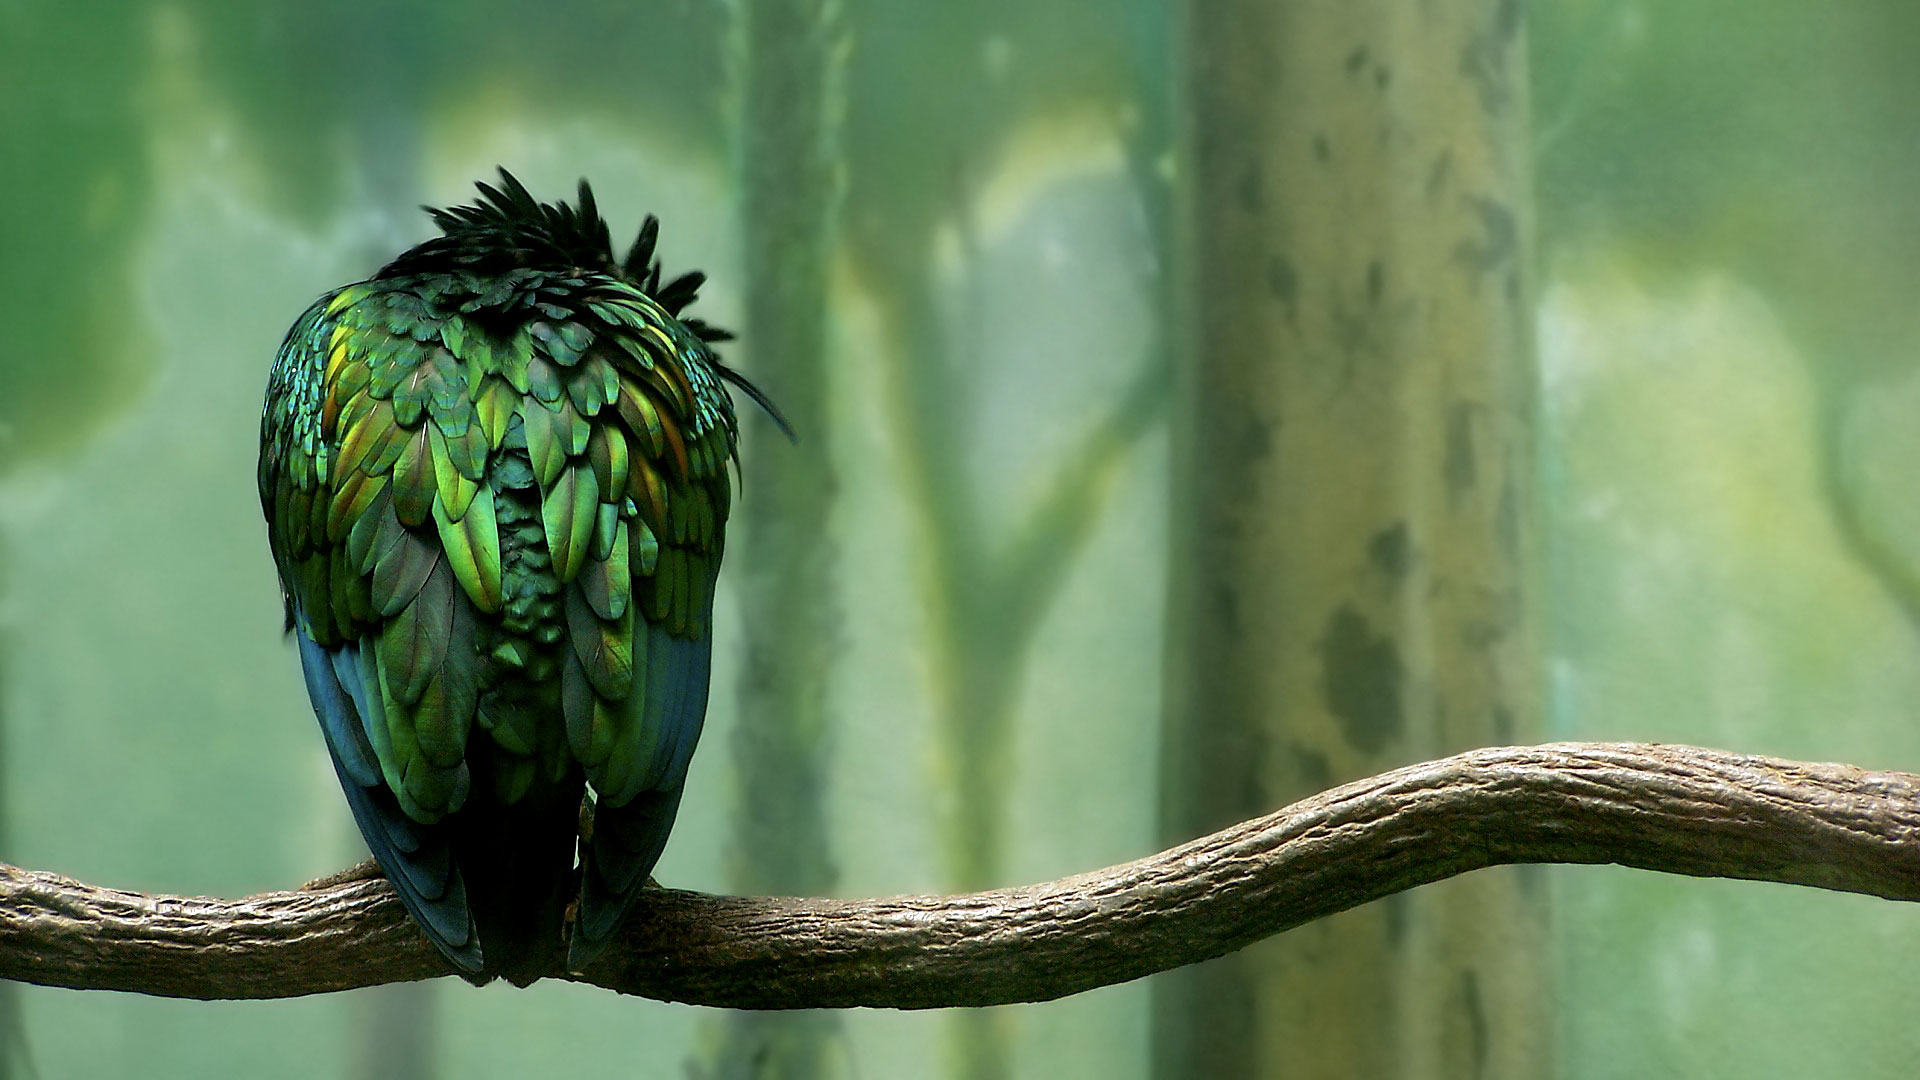 Green Colored Bird Wallpapers HD Wallpapers 1920x1080